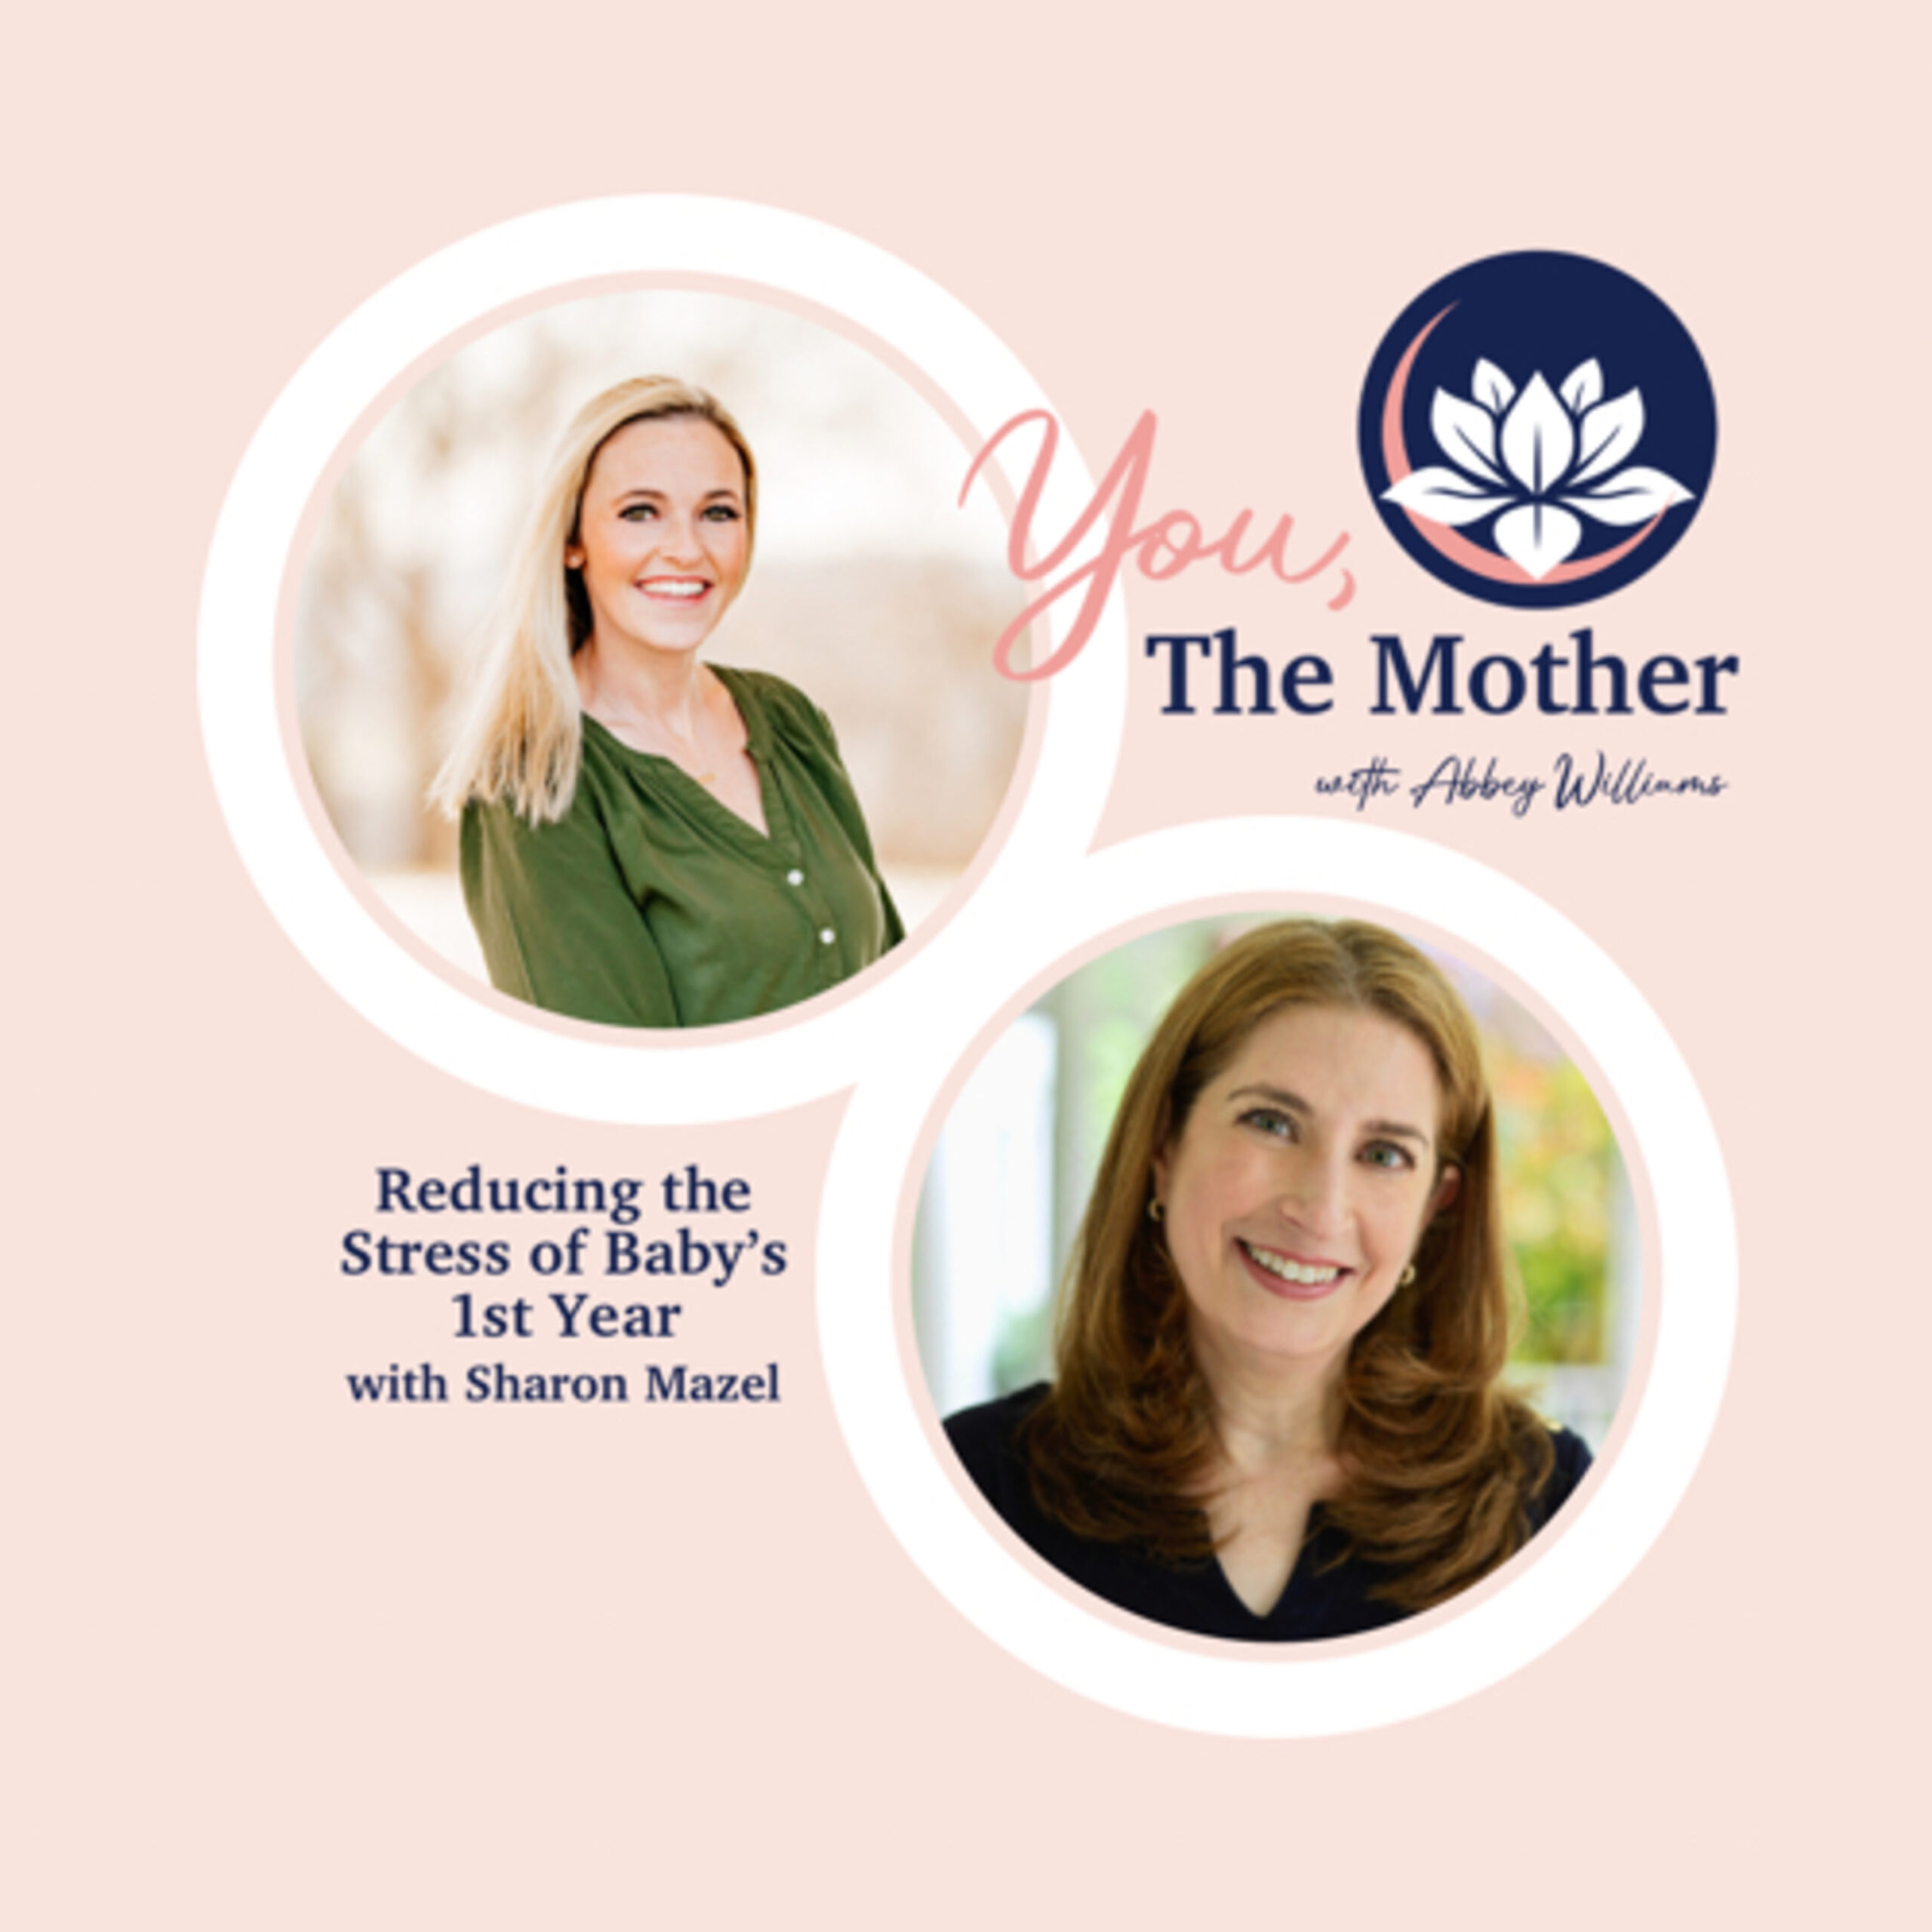 Reducing the Stress of Baby’s 1st Year with Sharon Mazel